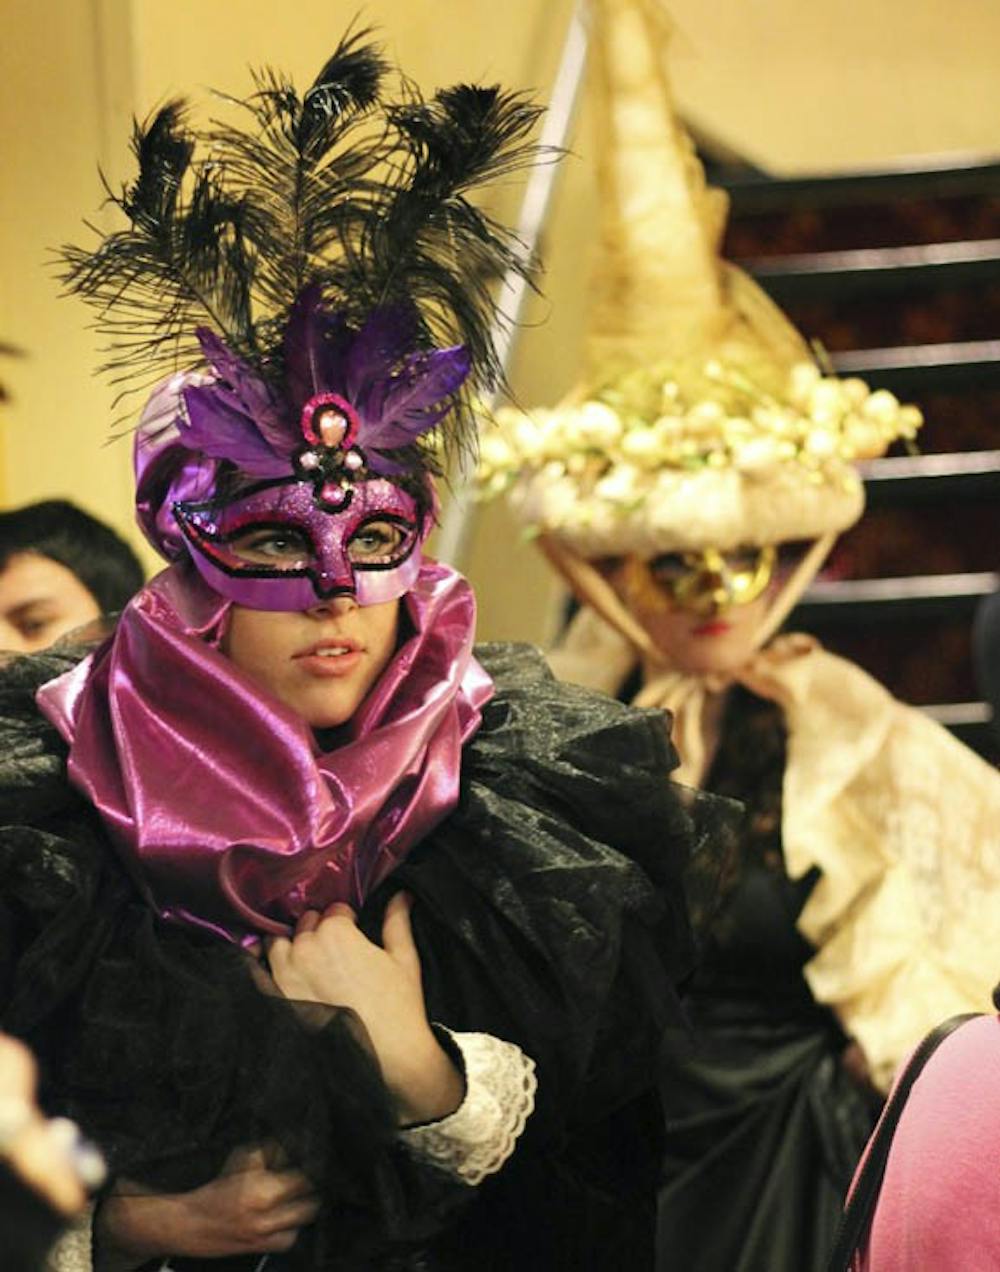 	The animal sanctuary Goathouse Refuge held a Venetian Carnevale to raise money. Lindsay Patton dressed up for the event.